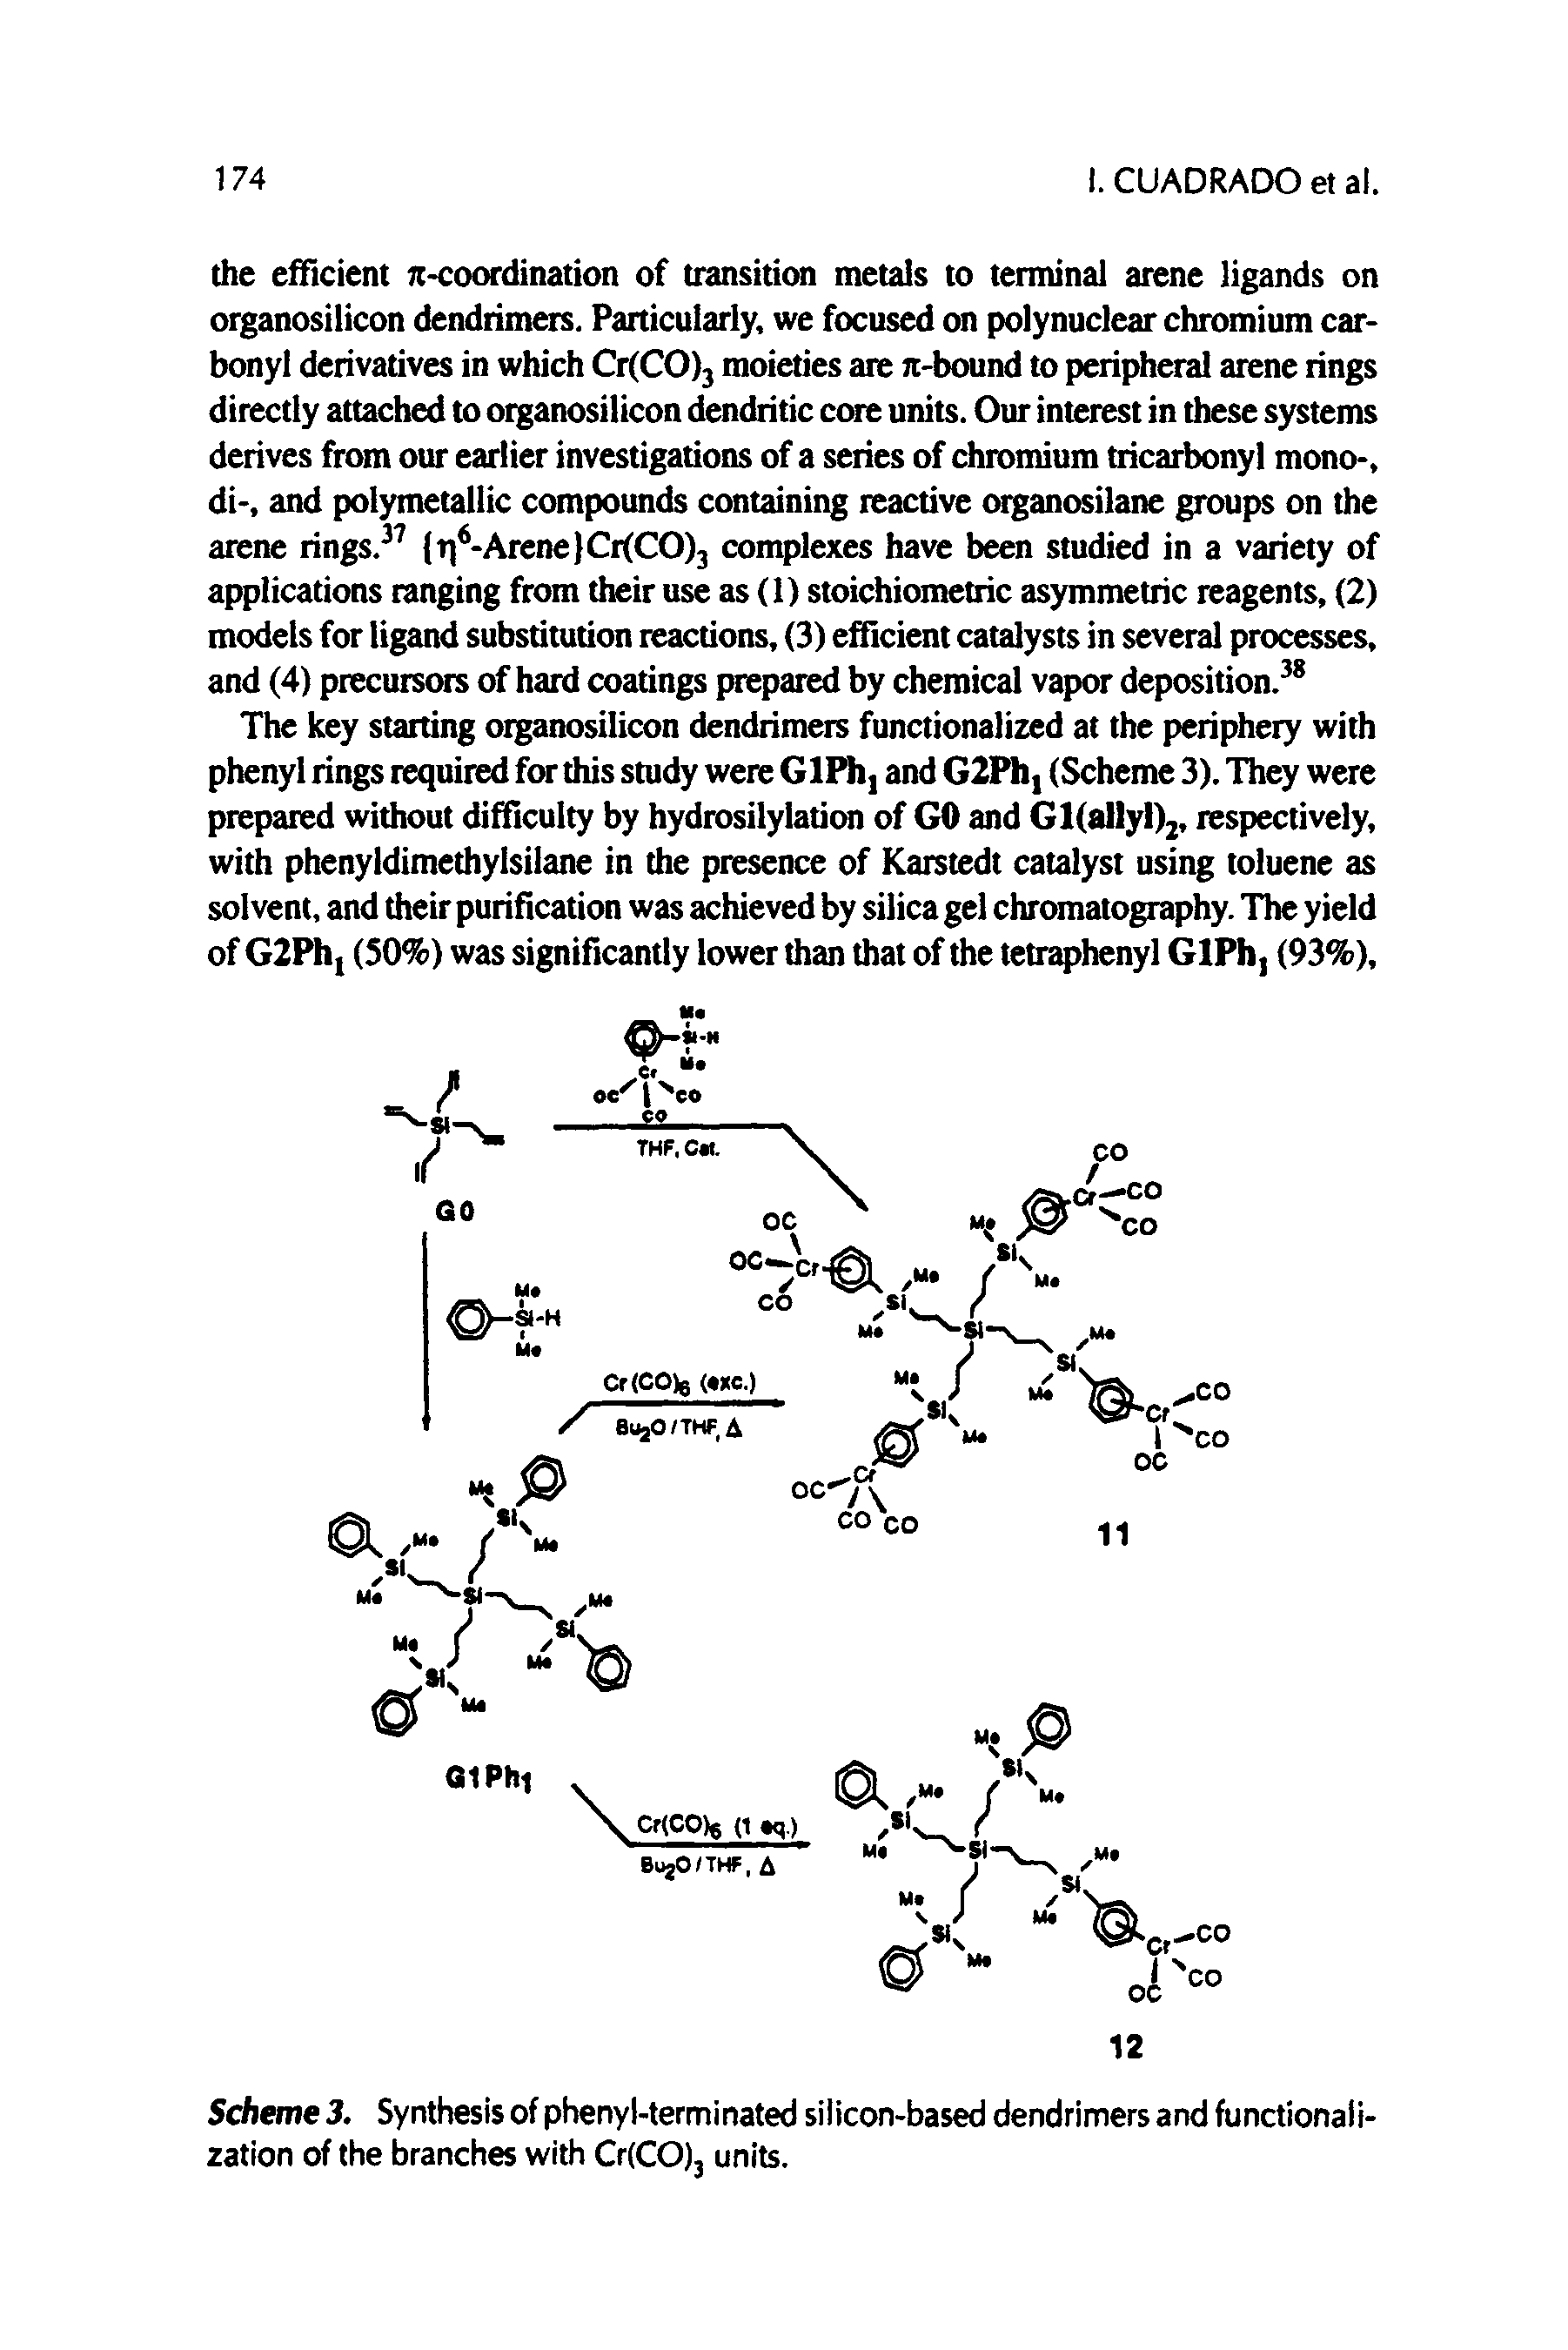 Scheme 3. Synthesis of phenyl-terminated silicon-based dendrimers and functionalization of the branches with Cr(CO)j units.